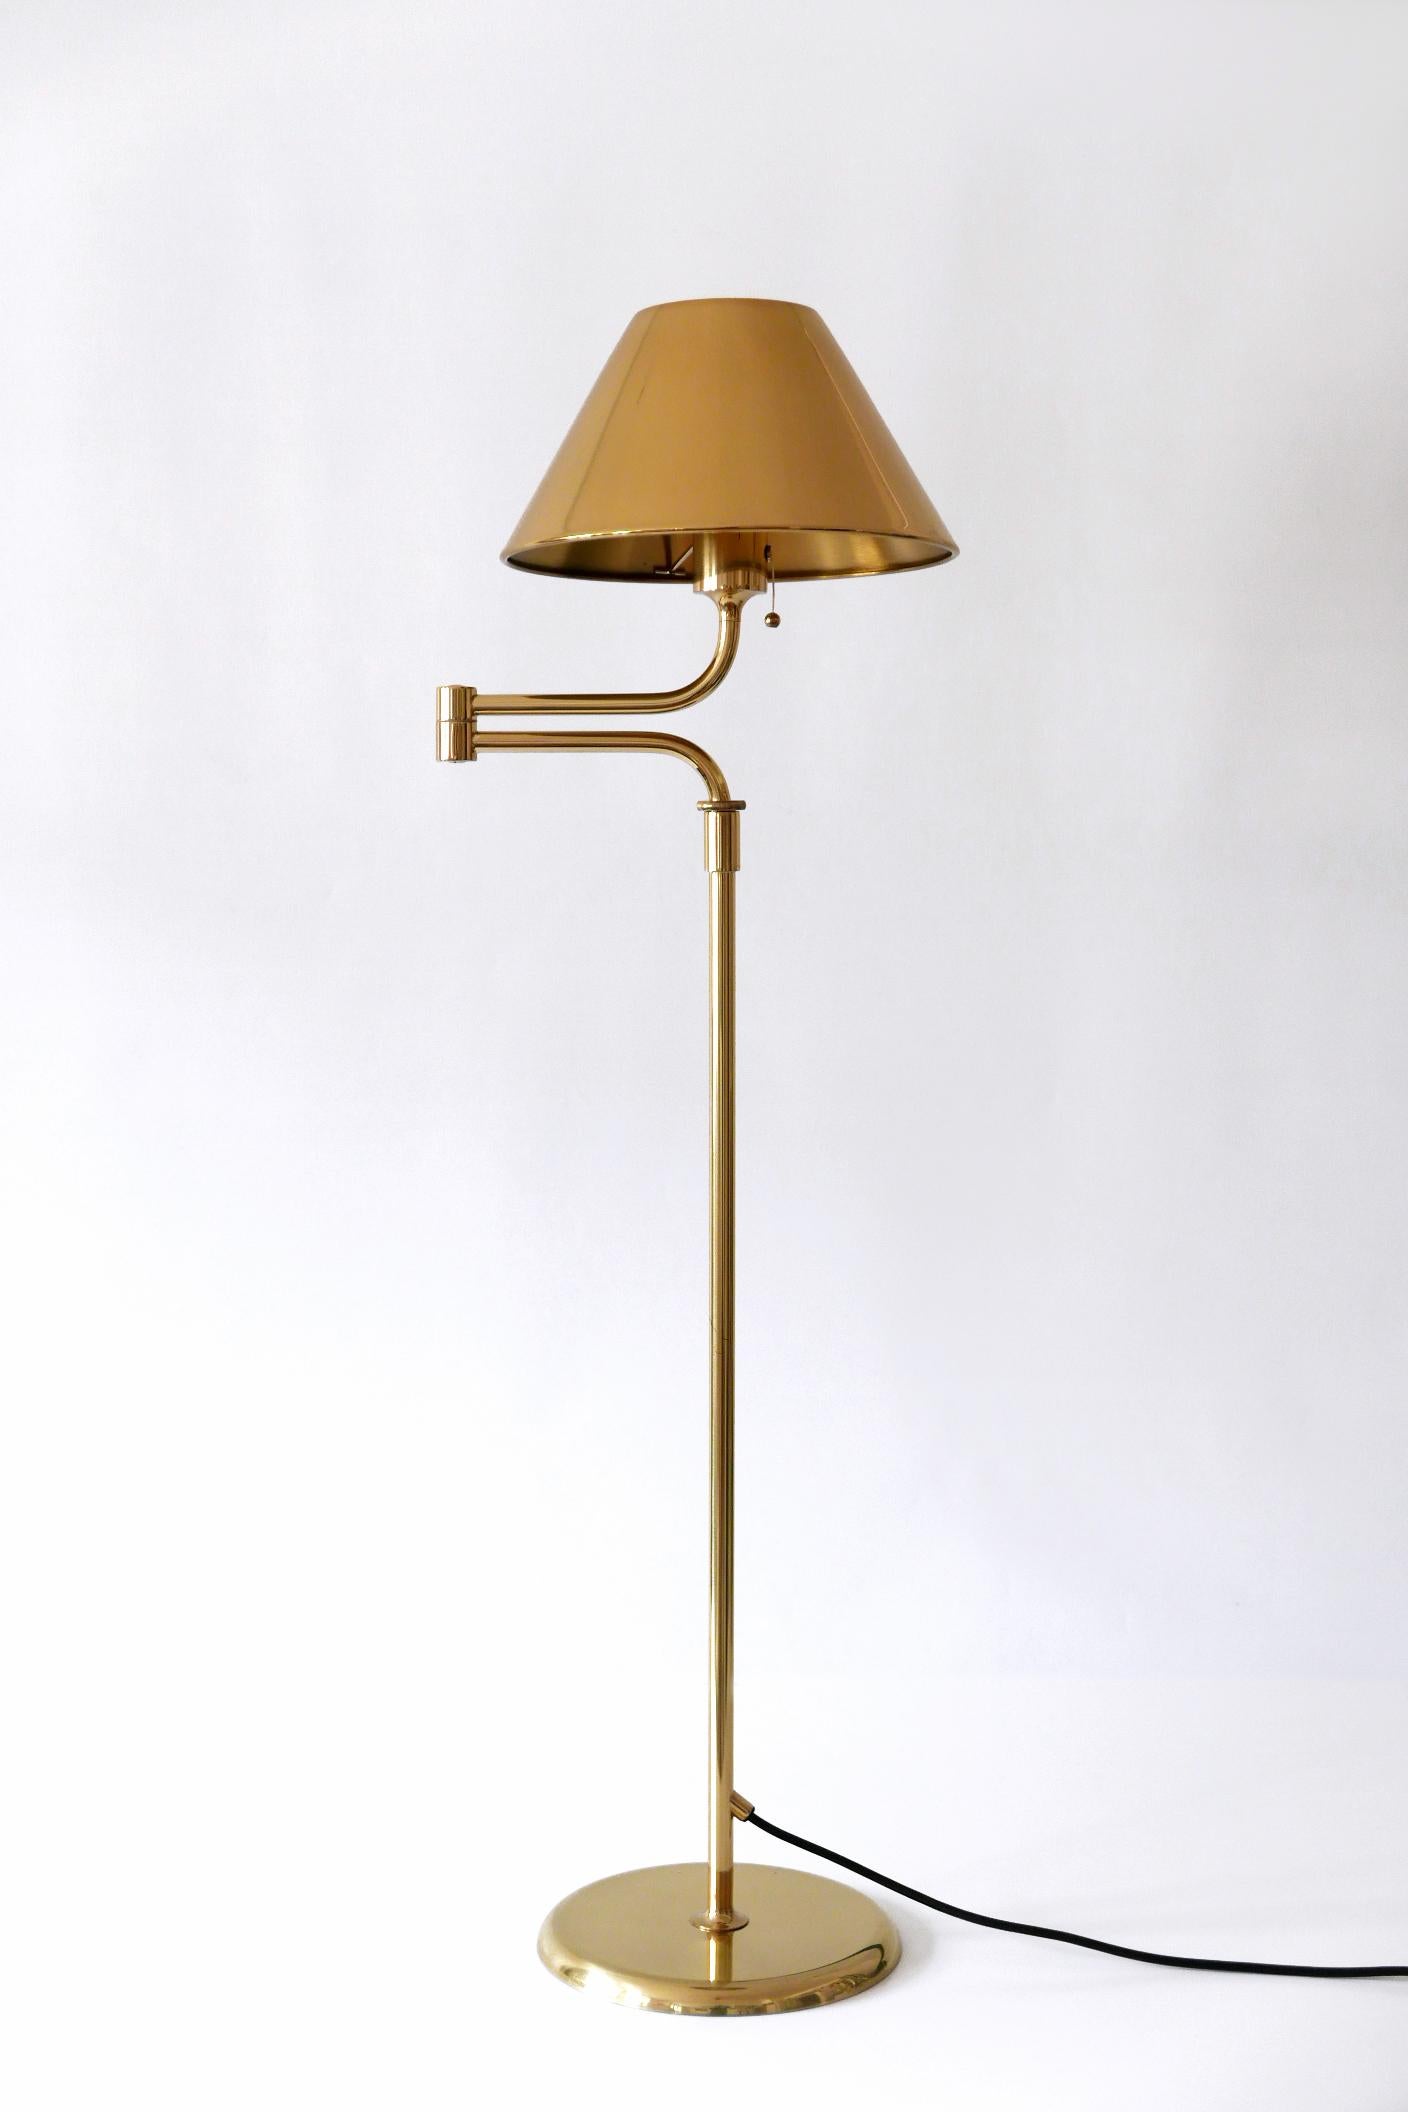 Polished Articulated Brass Floor Lamp or Reading Light by Florian Schulz 1980s Germany